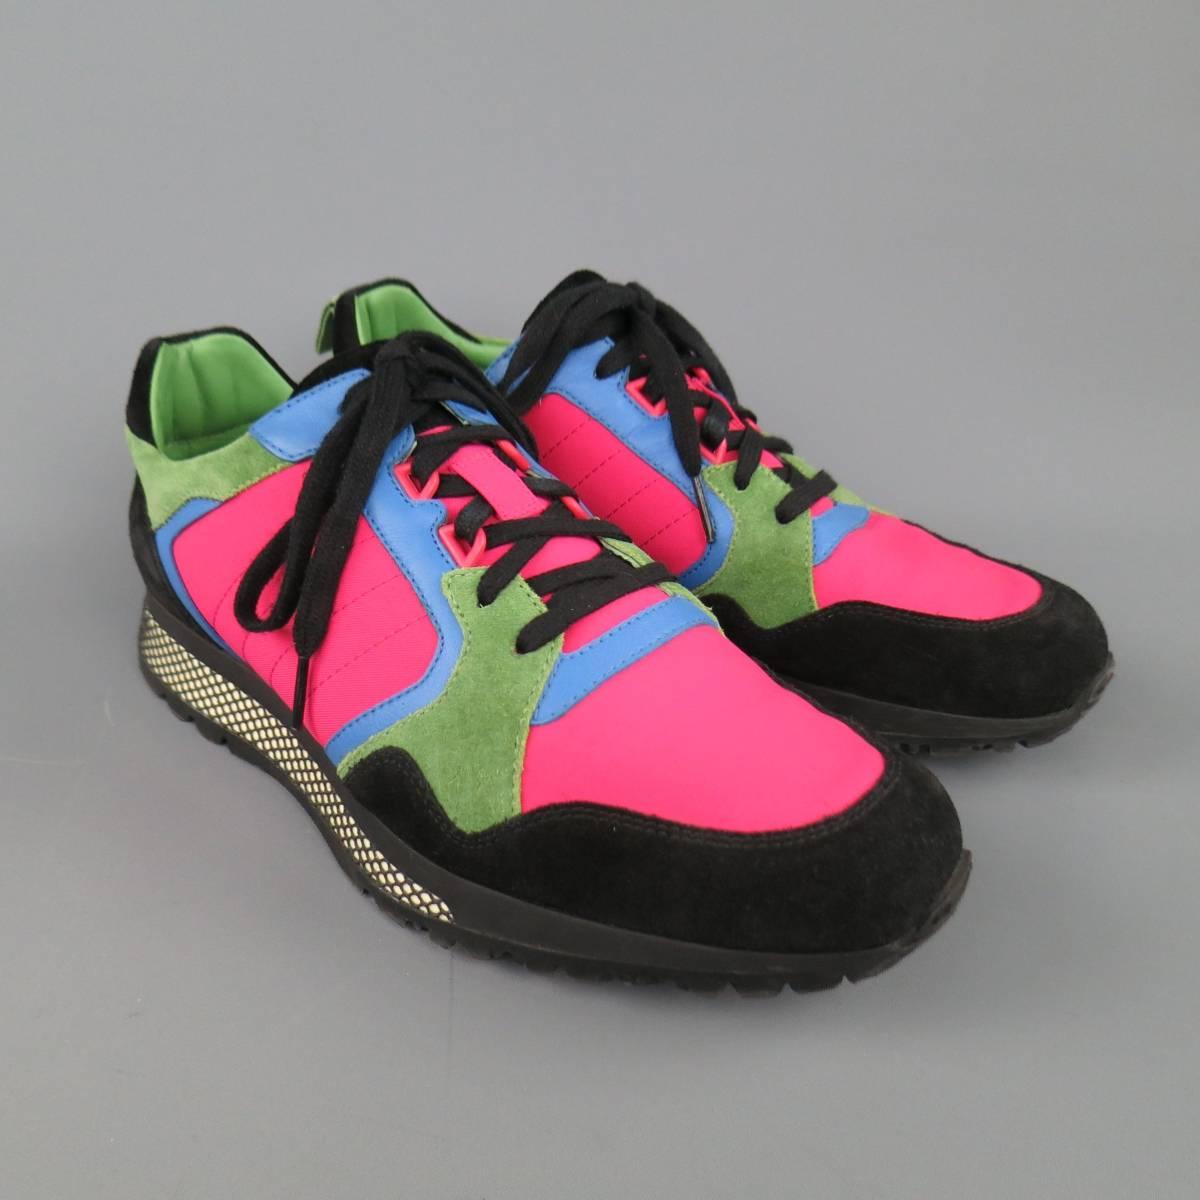 Gucci trainers in a vibrant neon pink nylon featuring a black suede toe and heel, panels of green suede and blue leather, and trainer sole with fishnet overlay. Made in Italy.
 
Excellent Pre-Owned Condition.
Marked: UK 9
 
Outsole: 12 x 4 in.
